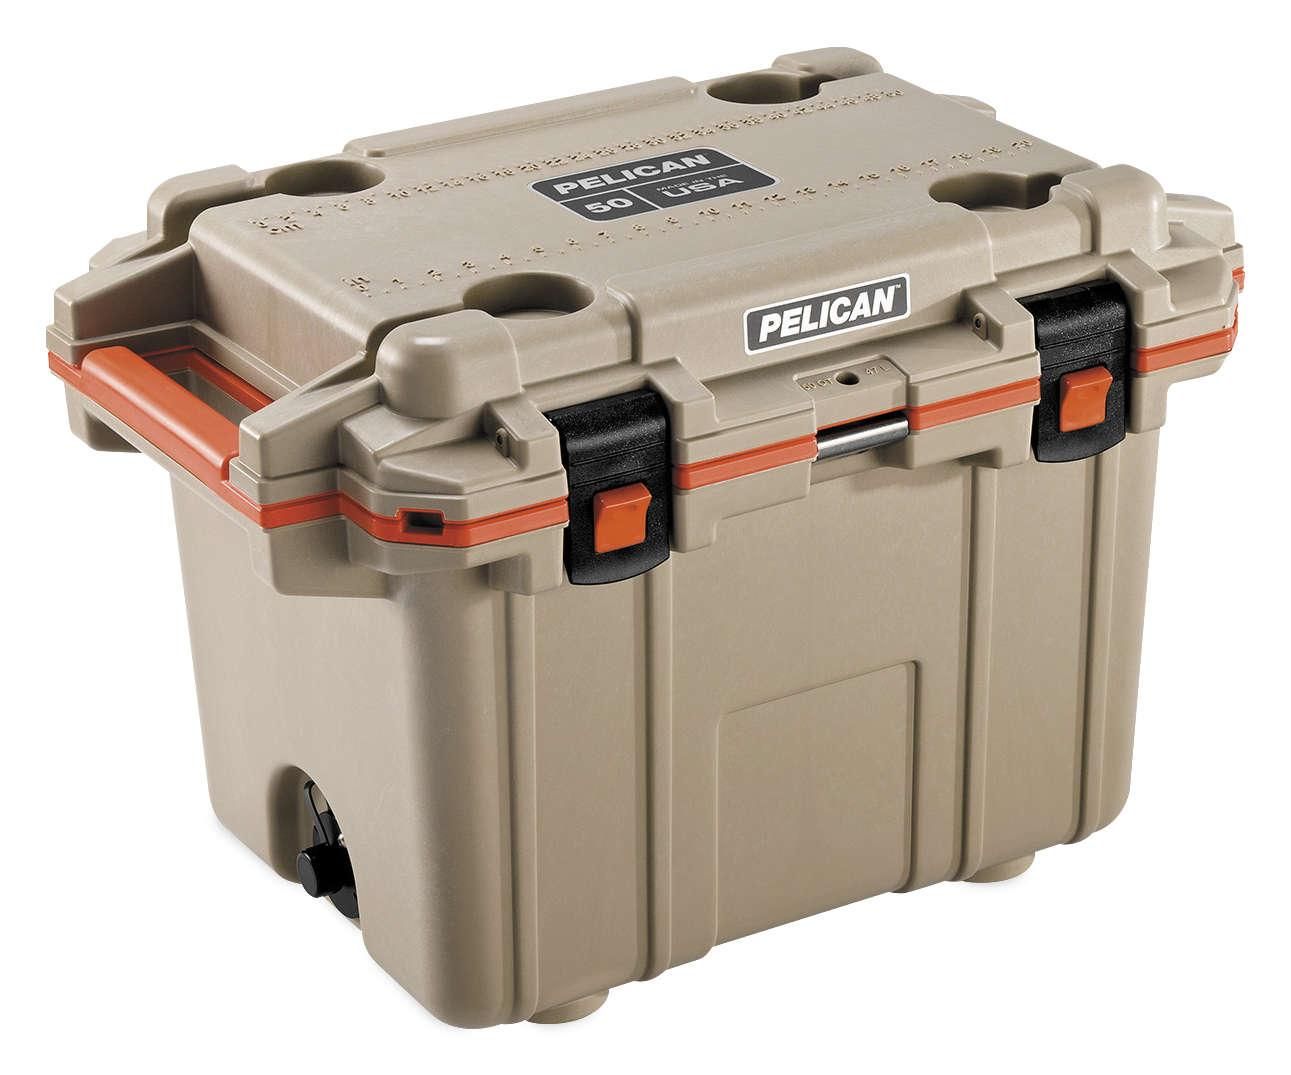 4PUY-PELICAN-P-50Q-2-TANORG 50 qt. Injection-Molded Cooler - Tan/Orange